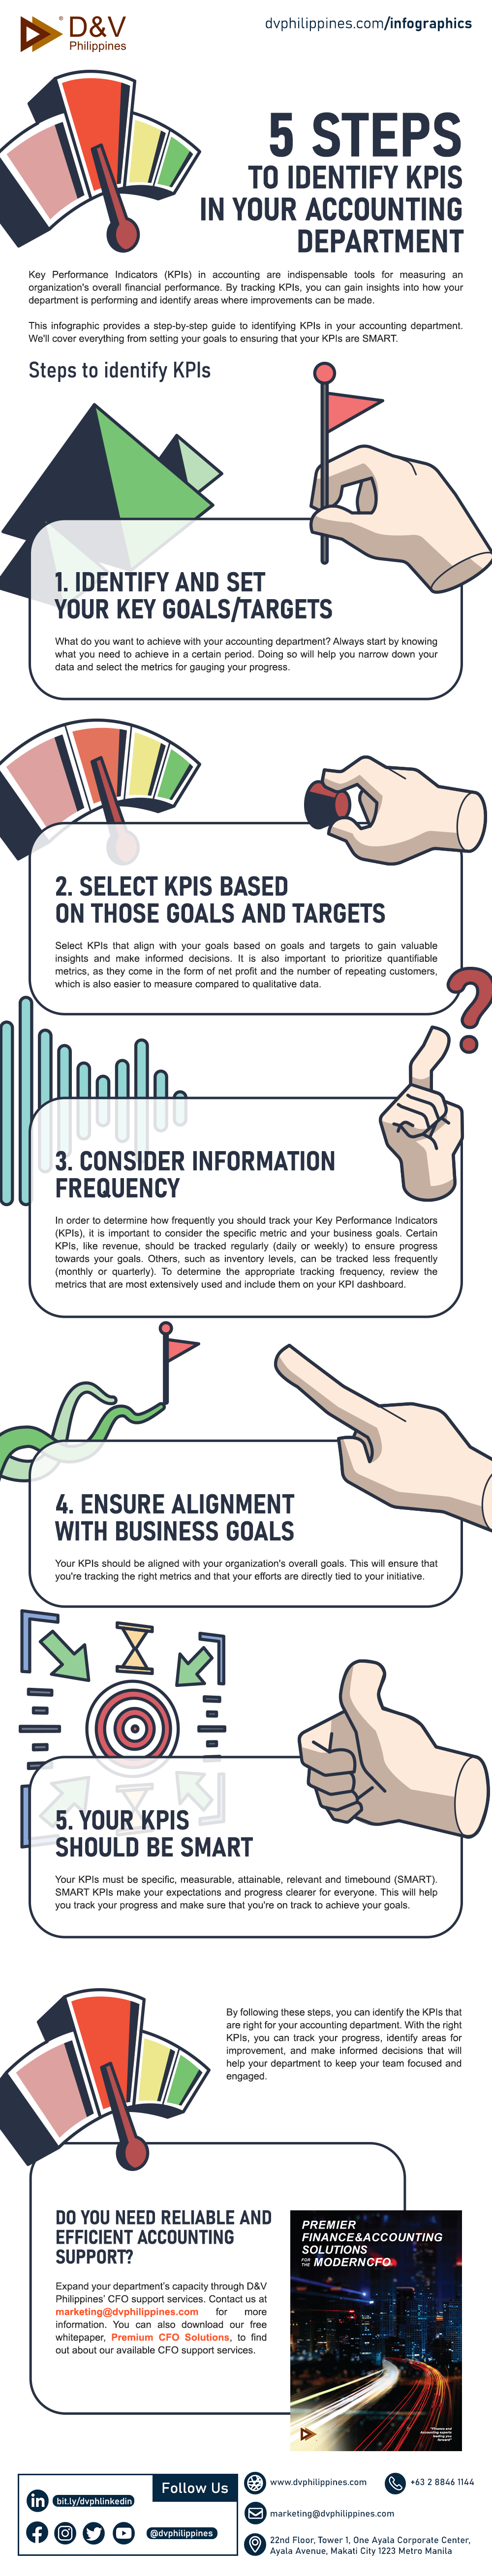 DV_Infographics_Website_AUG_082323_5 Steps to Identify KPIs in Your Accounting Department_